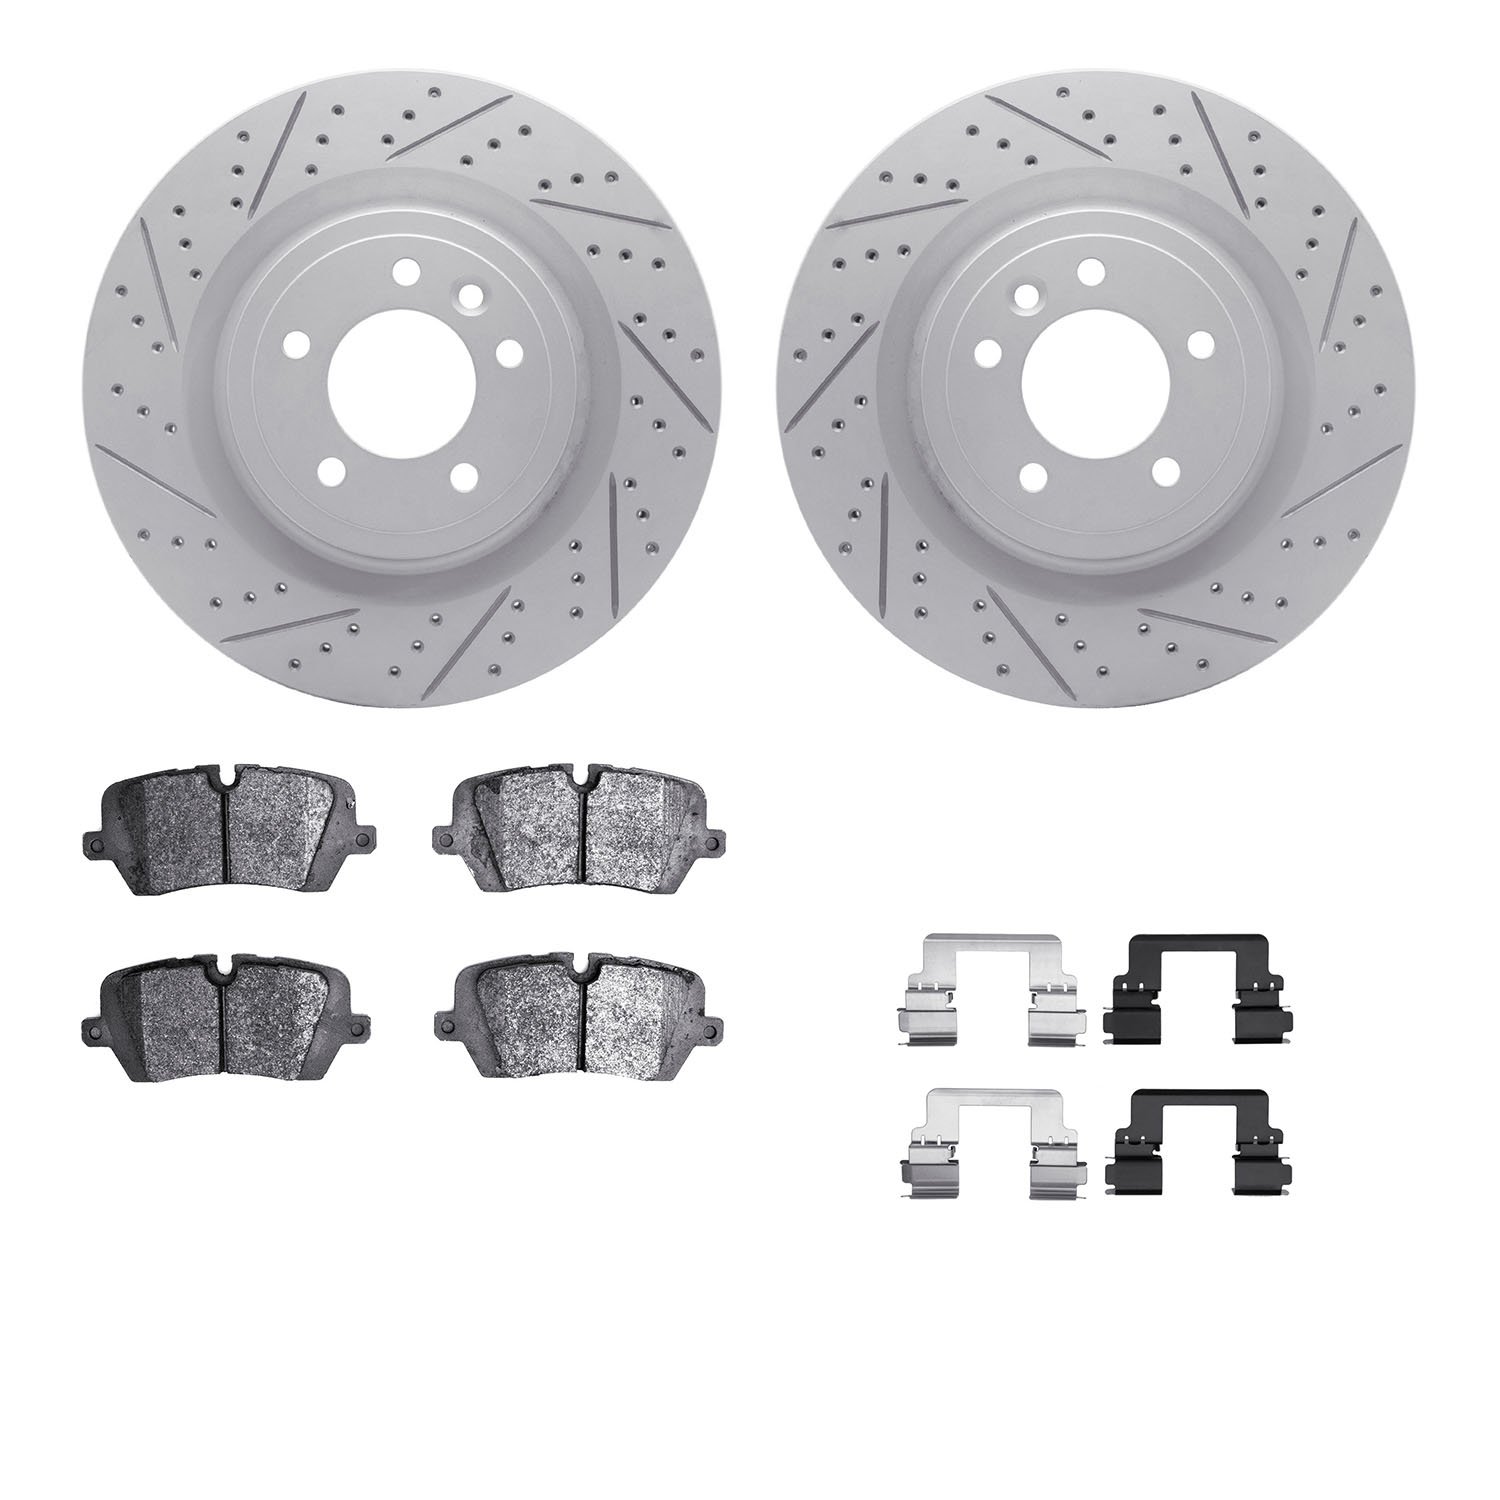 2512-11027 Geoperformance Drilled/Slotted Rotors w/5000 Advanced Brake Pads Kit & Hardware, Fits Select Land Rover, Position: Re